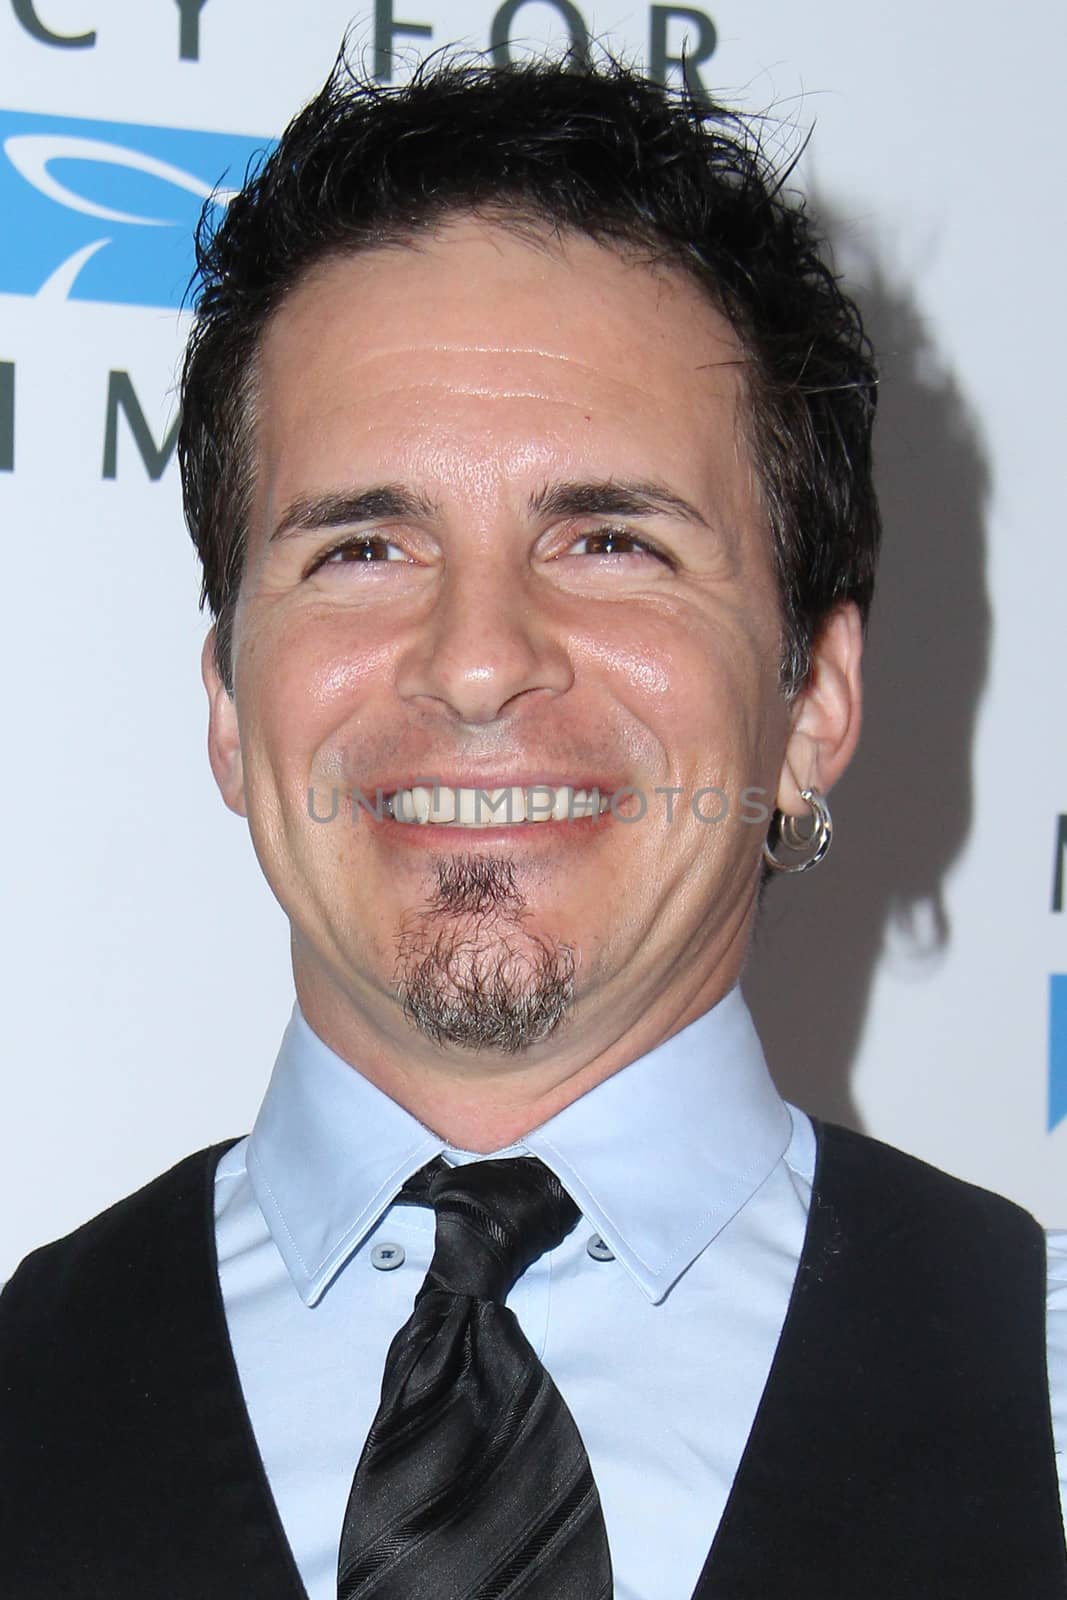 Hal Sparks
Mercy For Animals 15th Anniversary Gala, The London, West Hollywood, CA 09-12-14/ImageCollect by ImageCollect